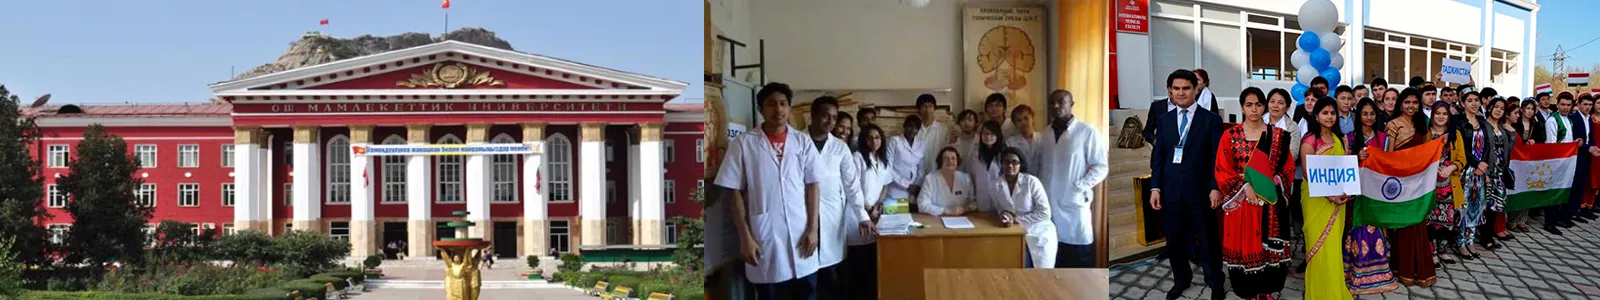 Mbbs in Osh state medical university